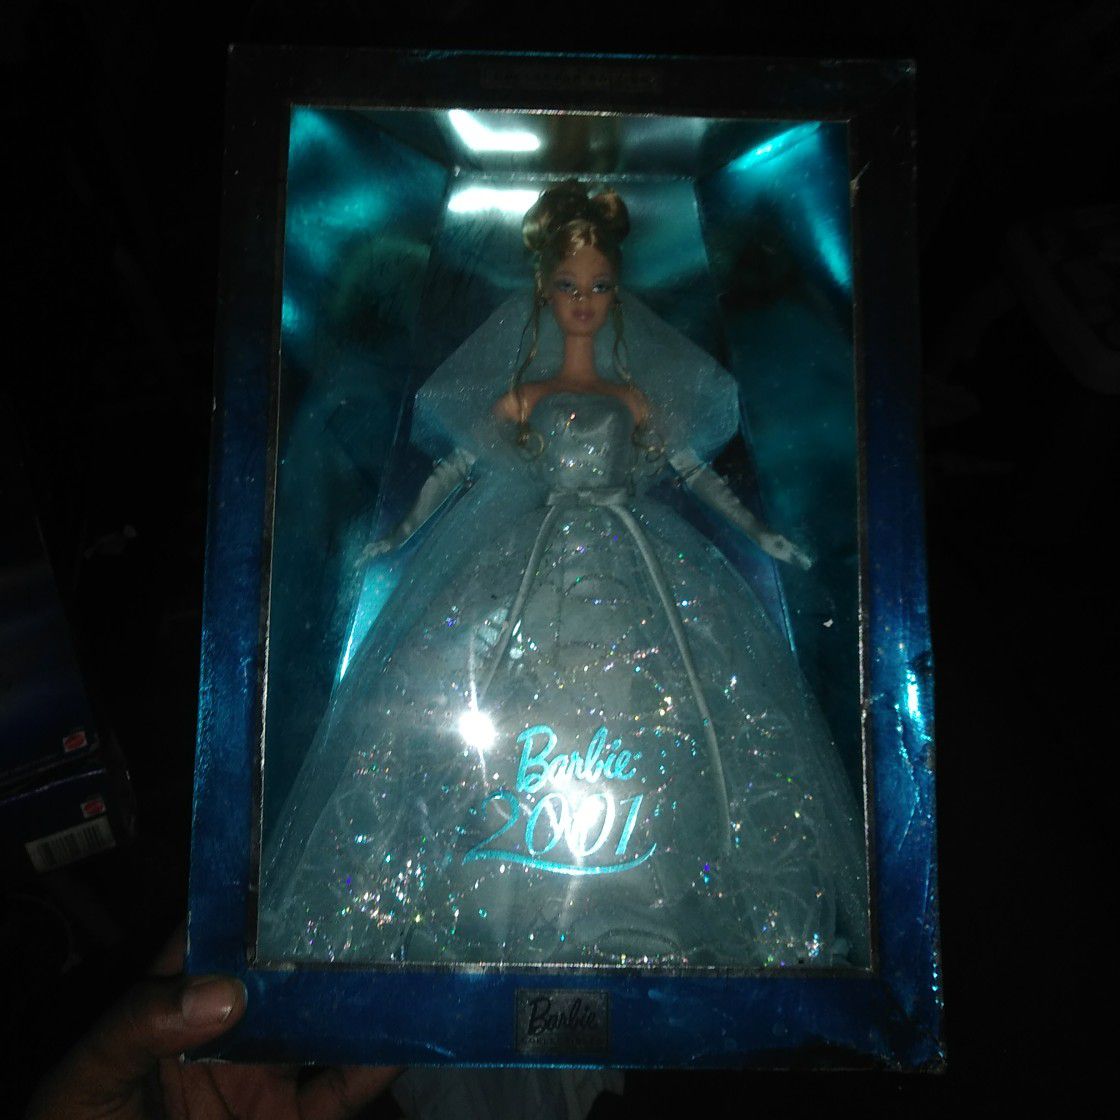 Barbie Collectable "2001"